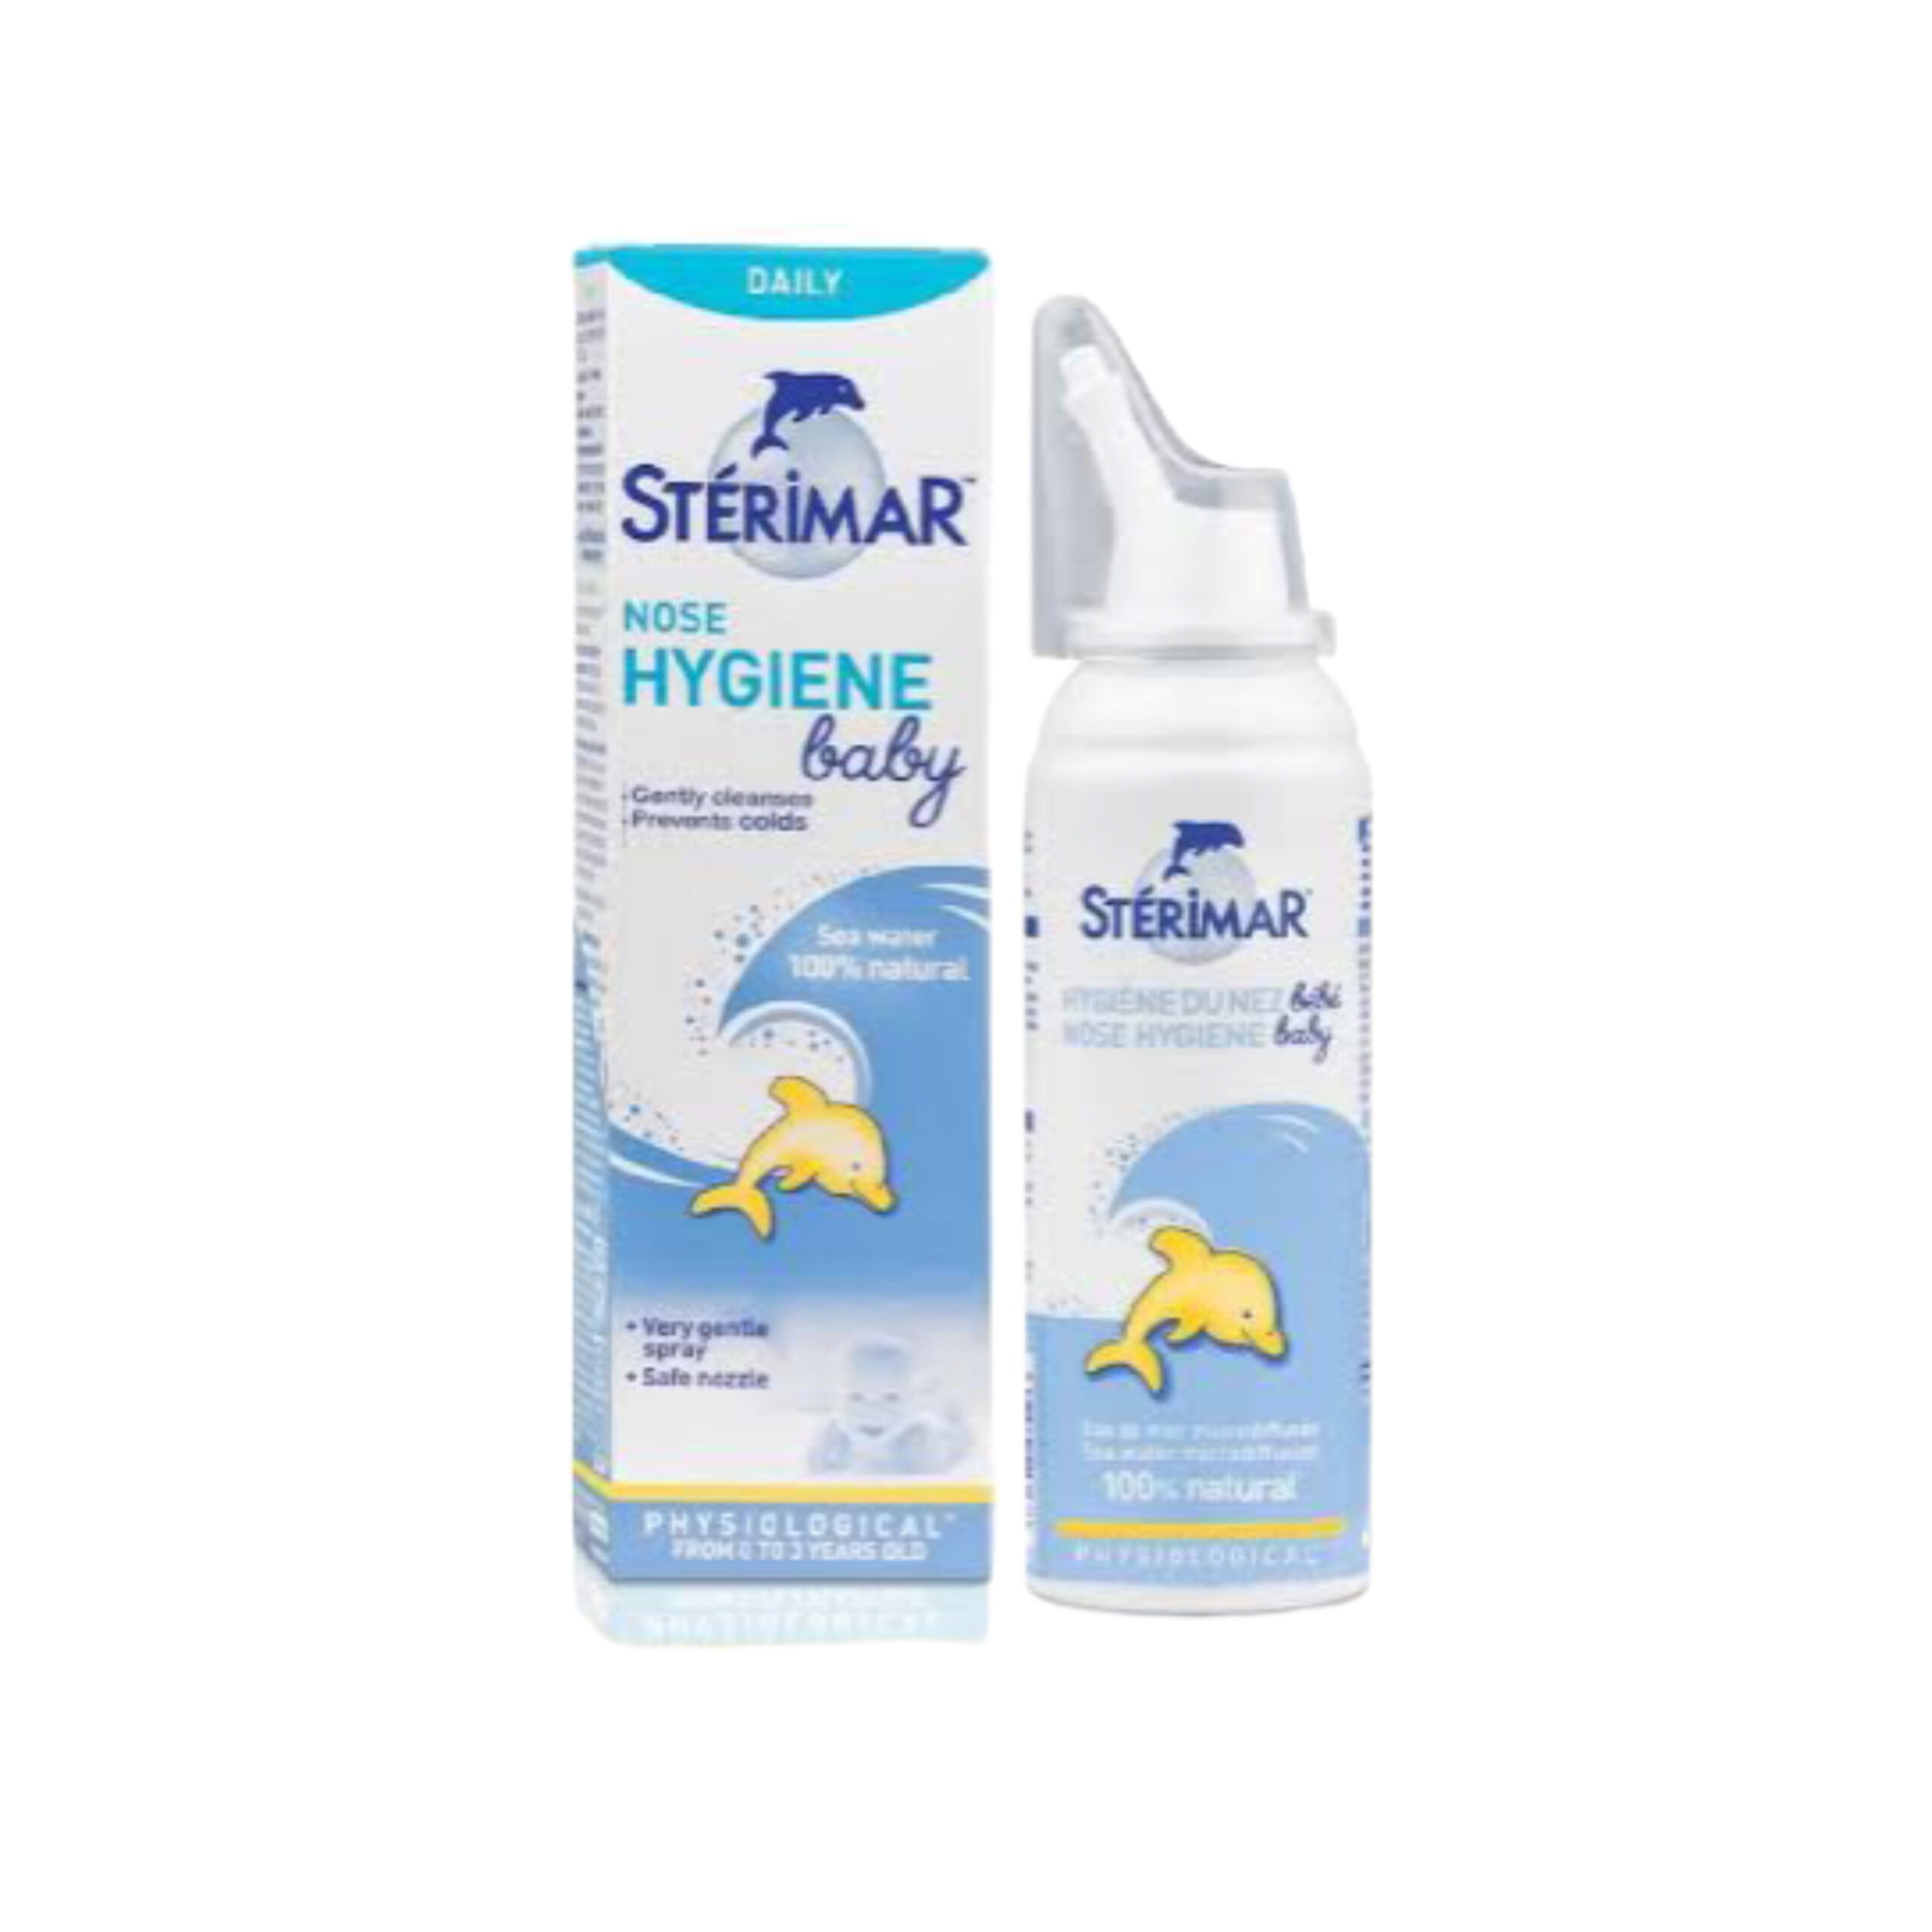 STERIMAR SEA WATER NASAL SPRAY 50ML (for 3 YEARS OLD AND ABOVE)